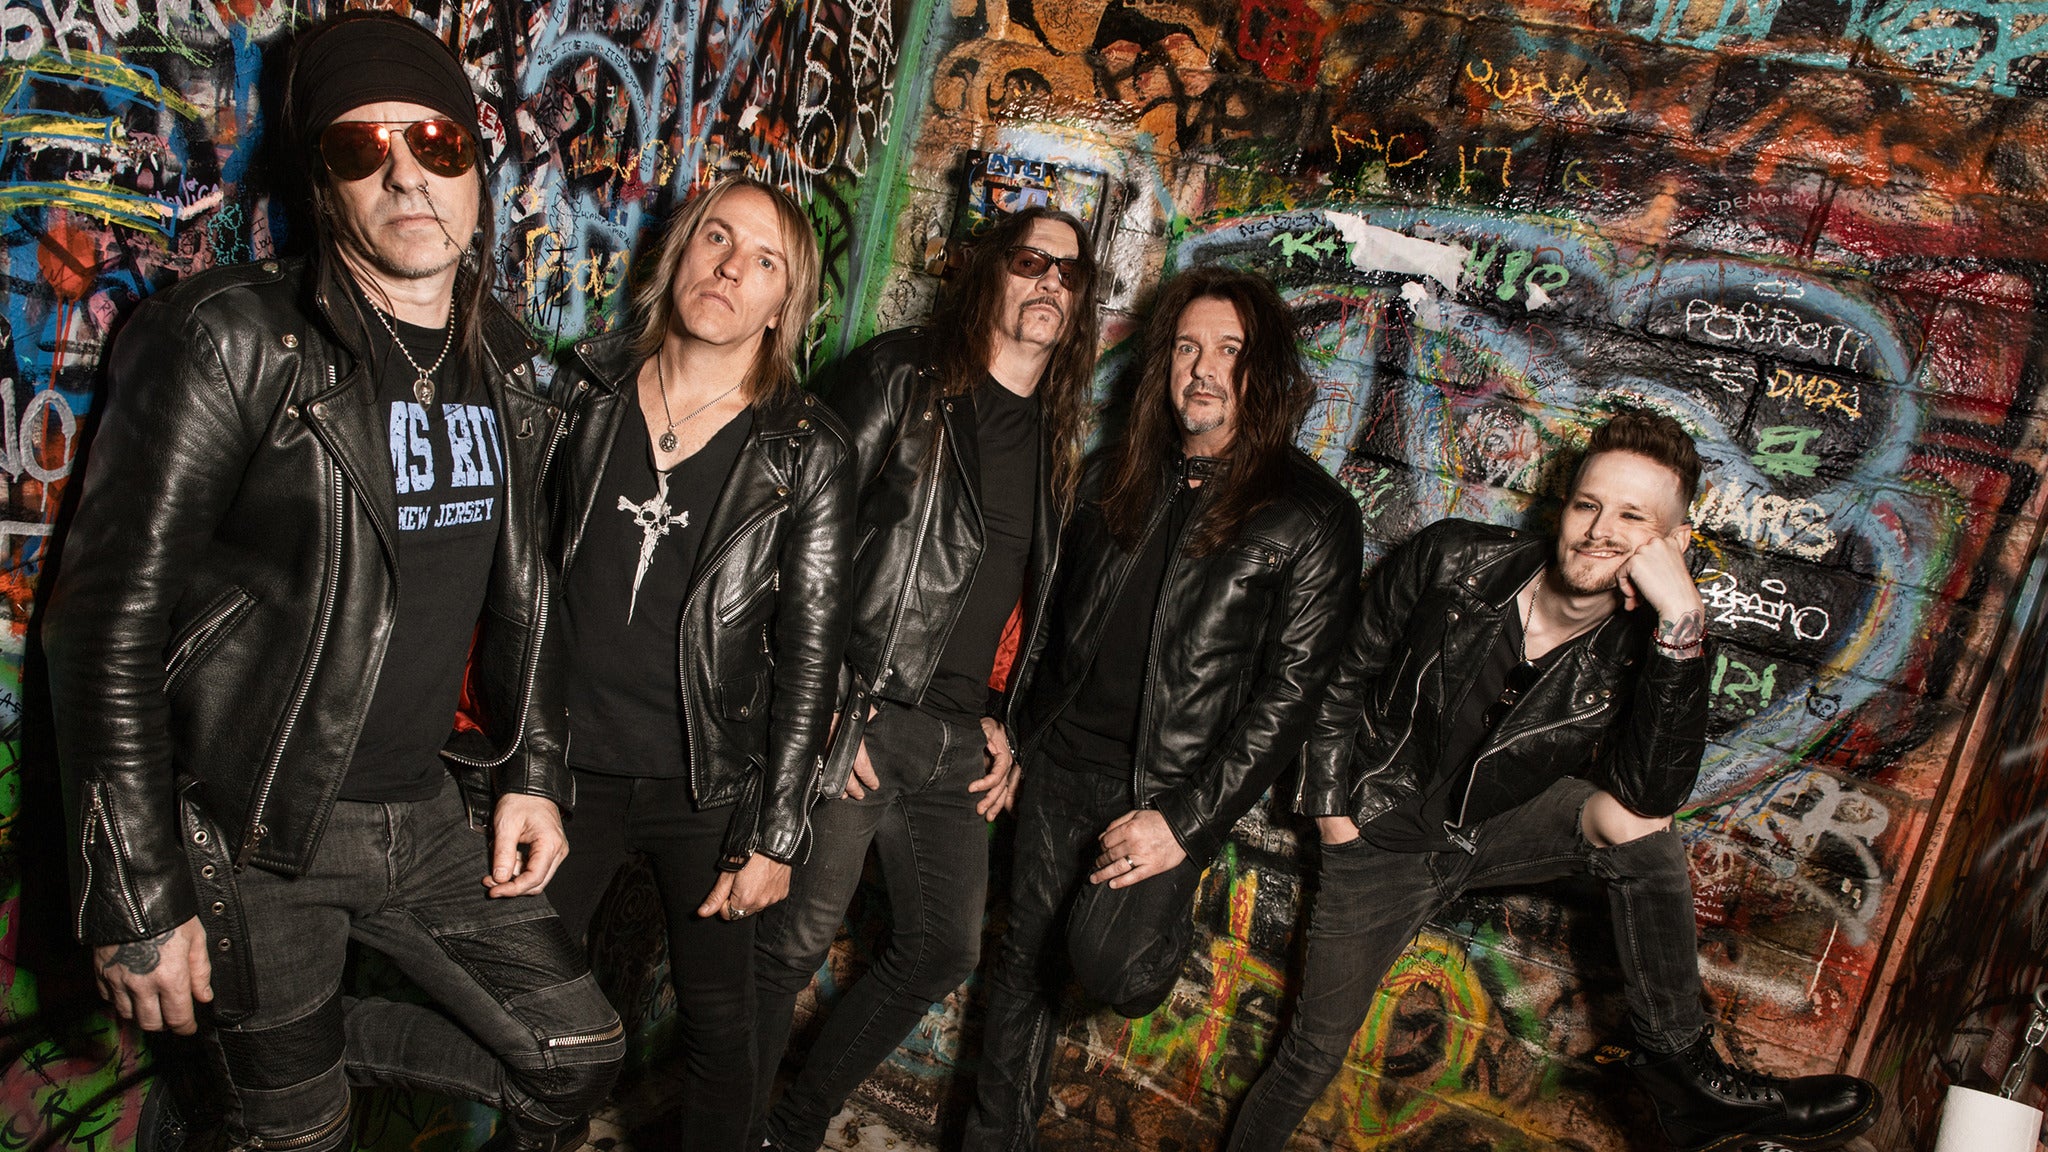 exclusive presale code for Skid Row & Warrant - The Gang's All Here Tour 2023 advanced tickets in Las Vegas